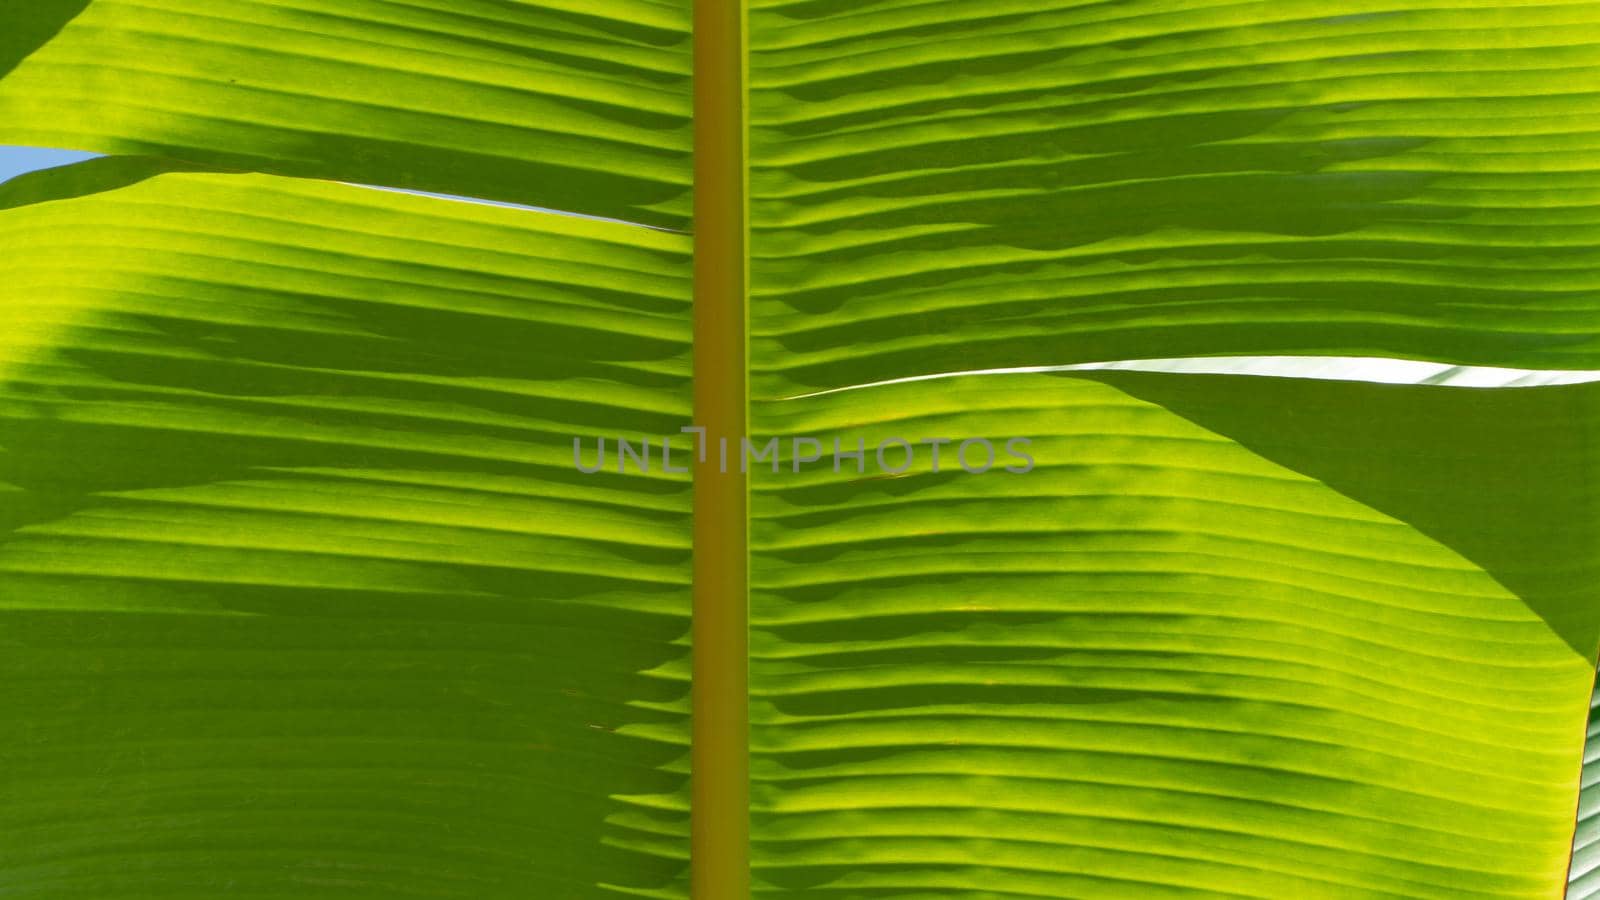 Background and texture of banana tree leaf, green leaf with veins. High quality photo